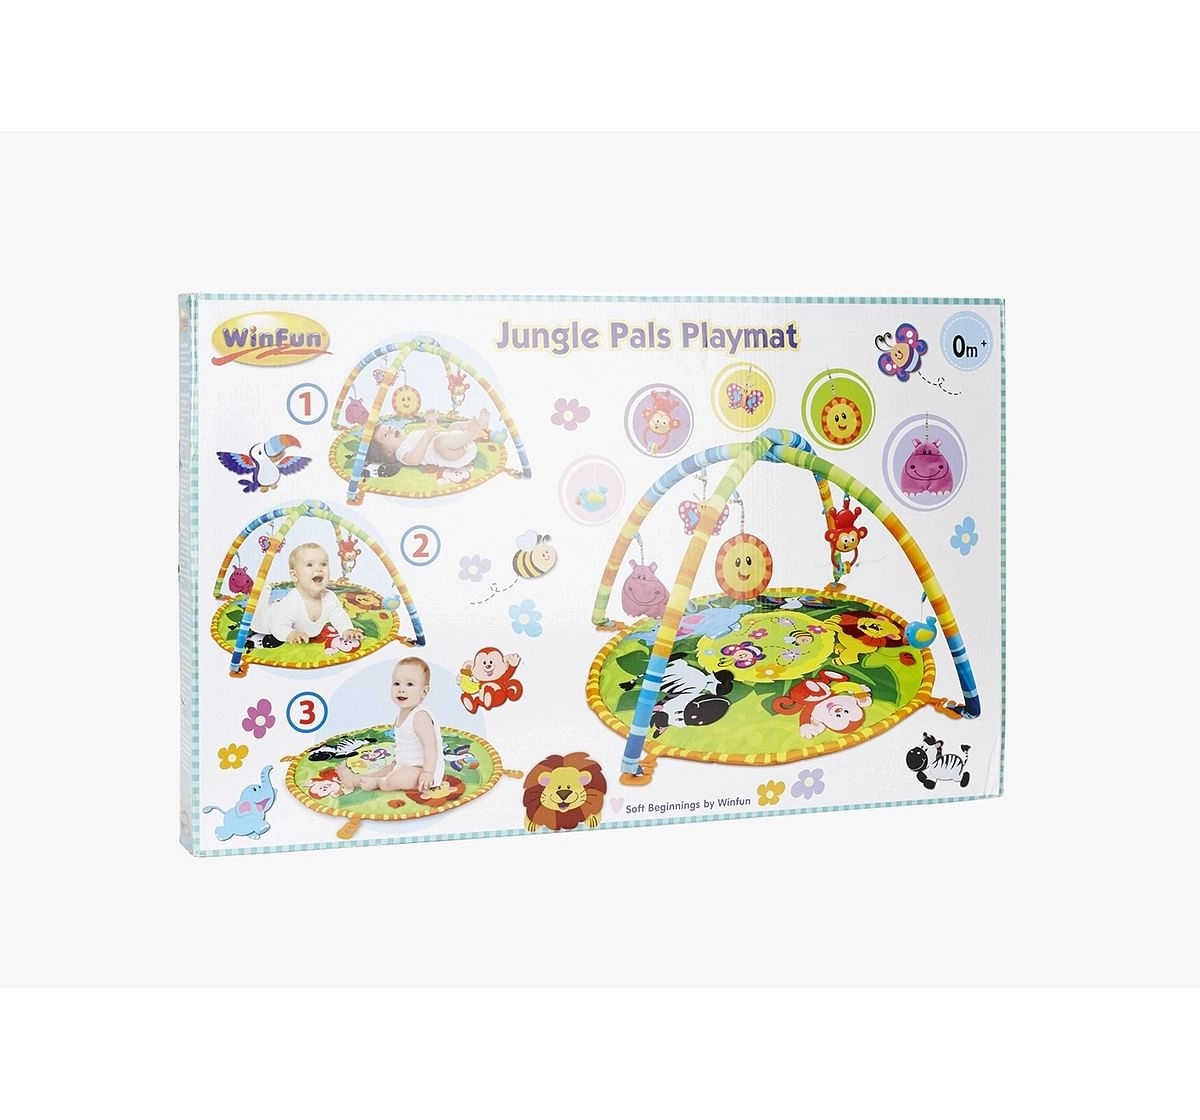 Winfun Jungle Pals Playmat Baby Gear for Kids age 0M+ 